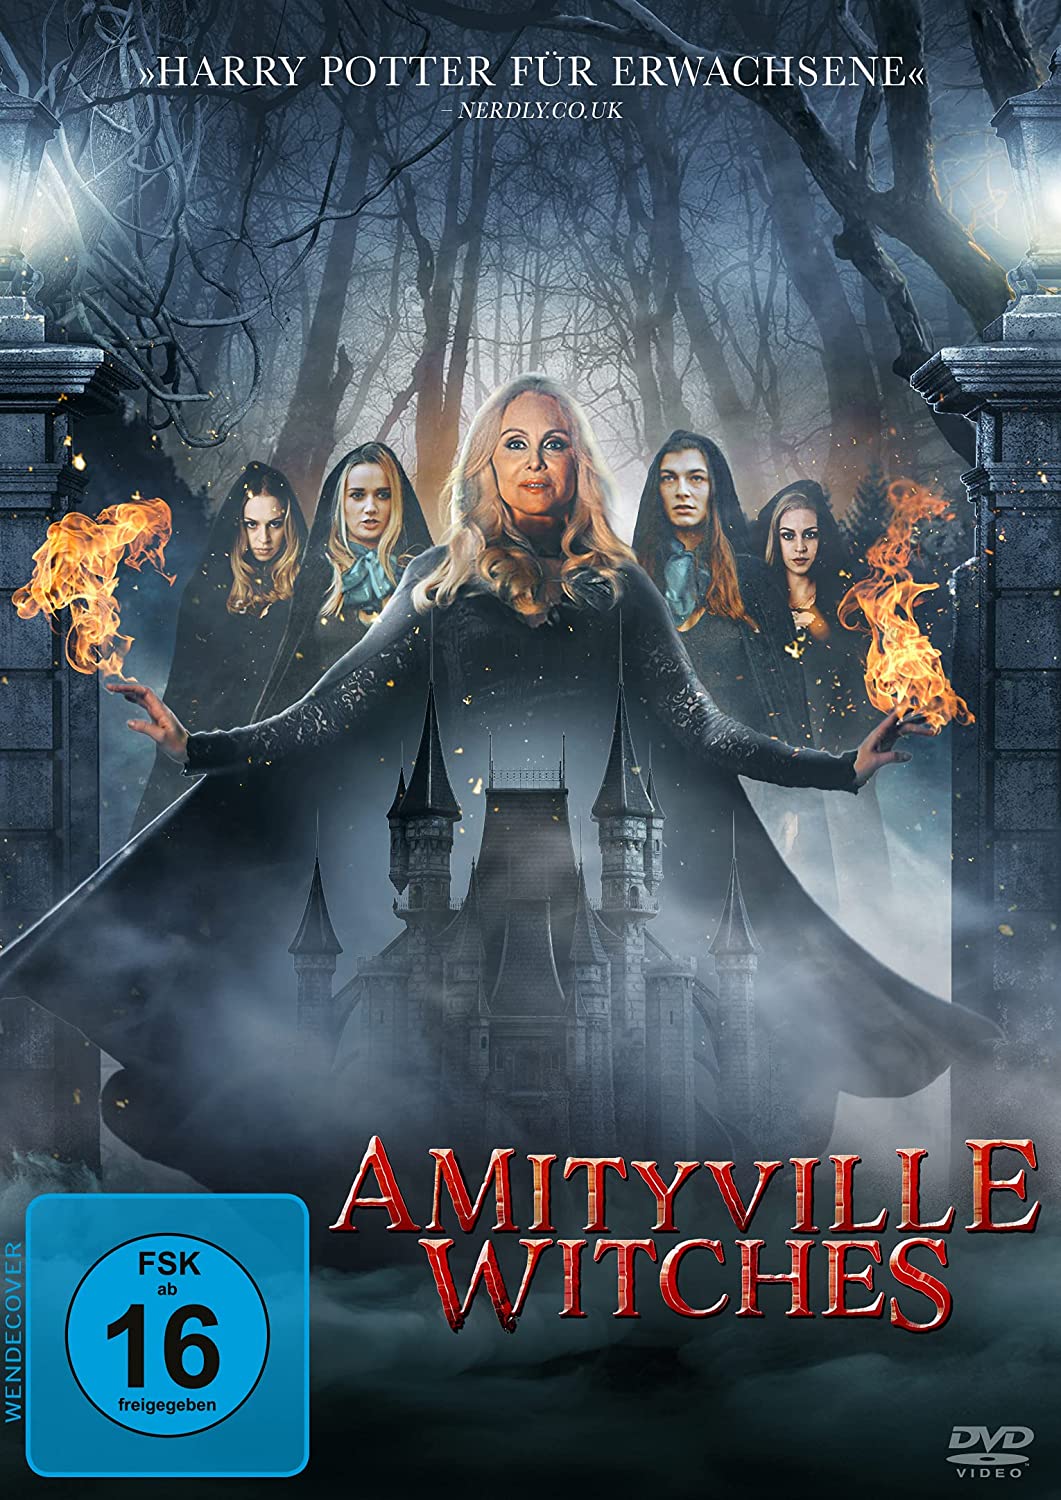 Amityville Witches Film 2020 Scary Movies De